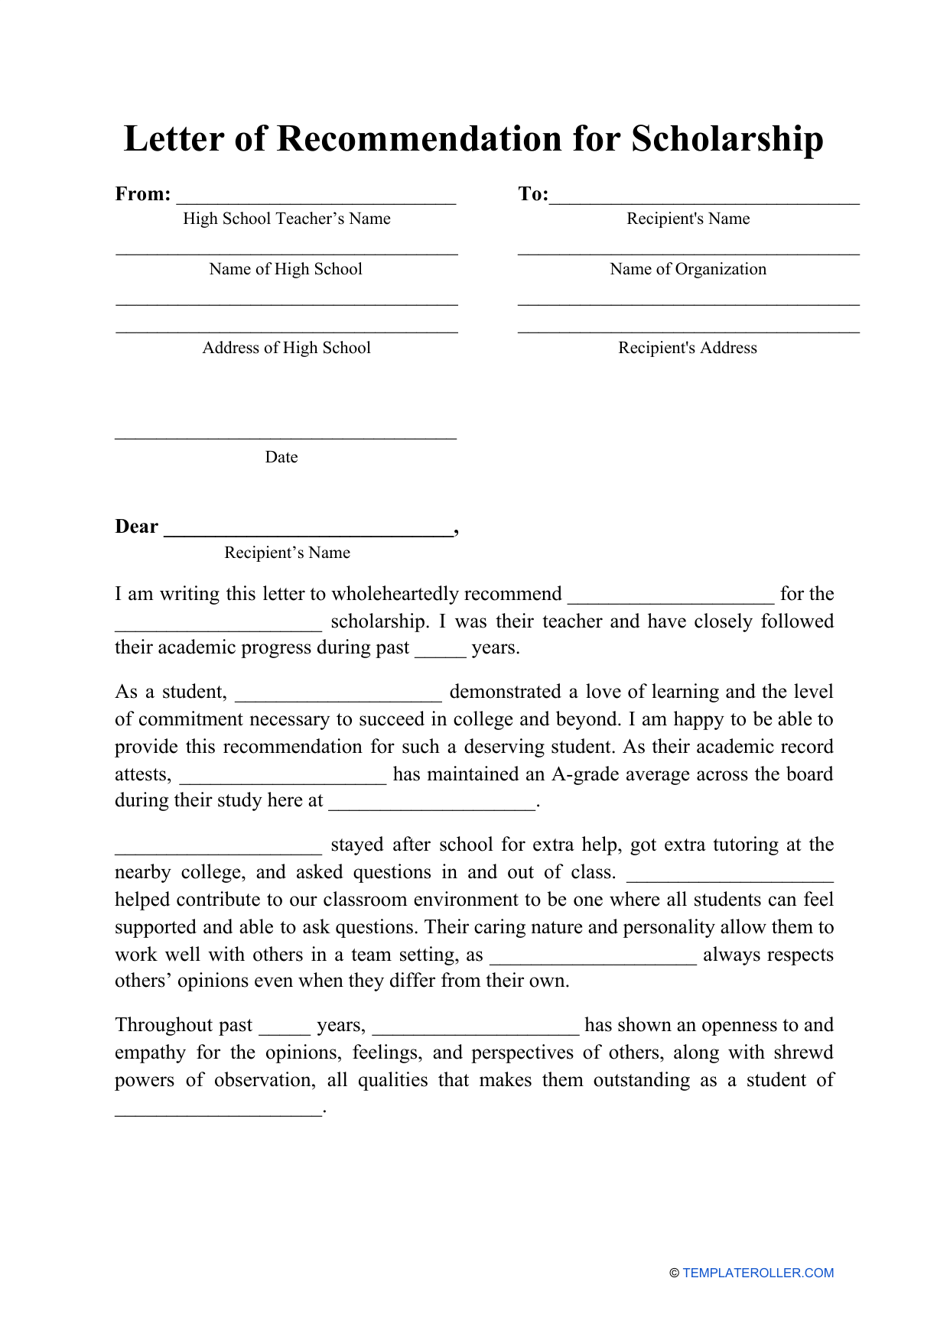 Letter of Recommendation for Scholarship Template - Preview